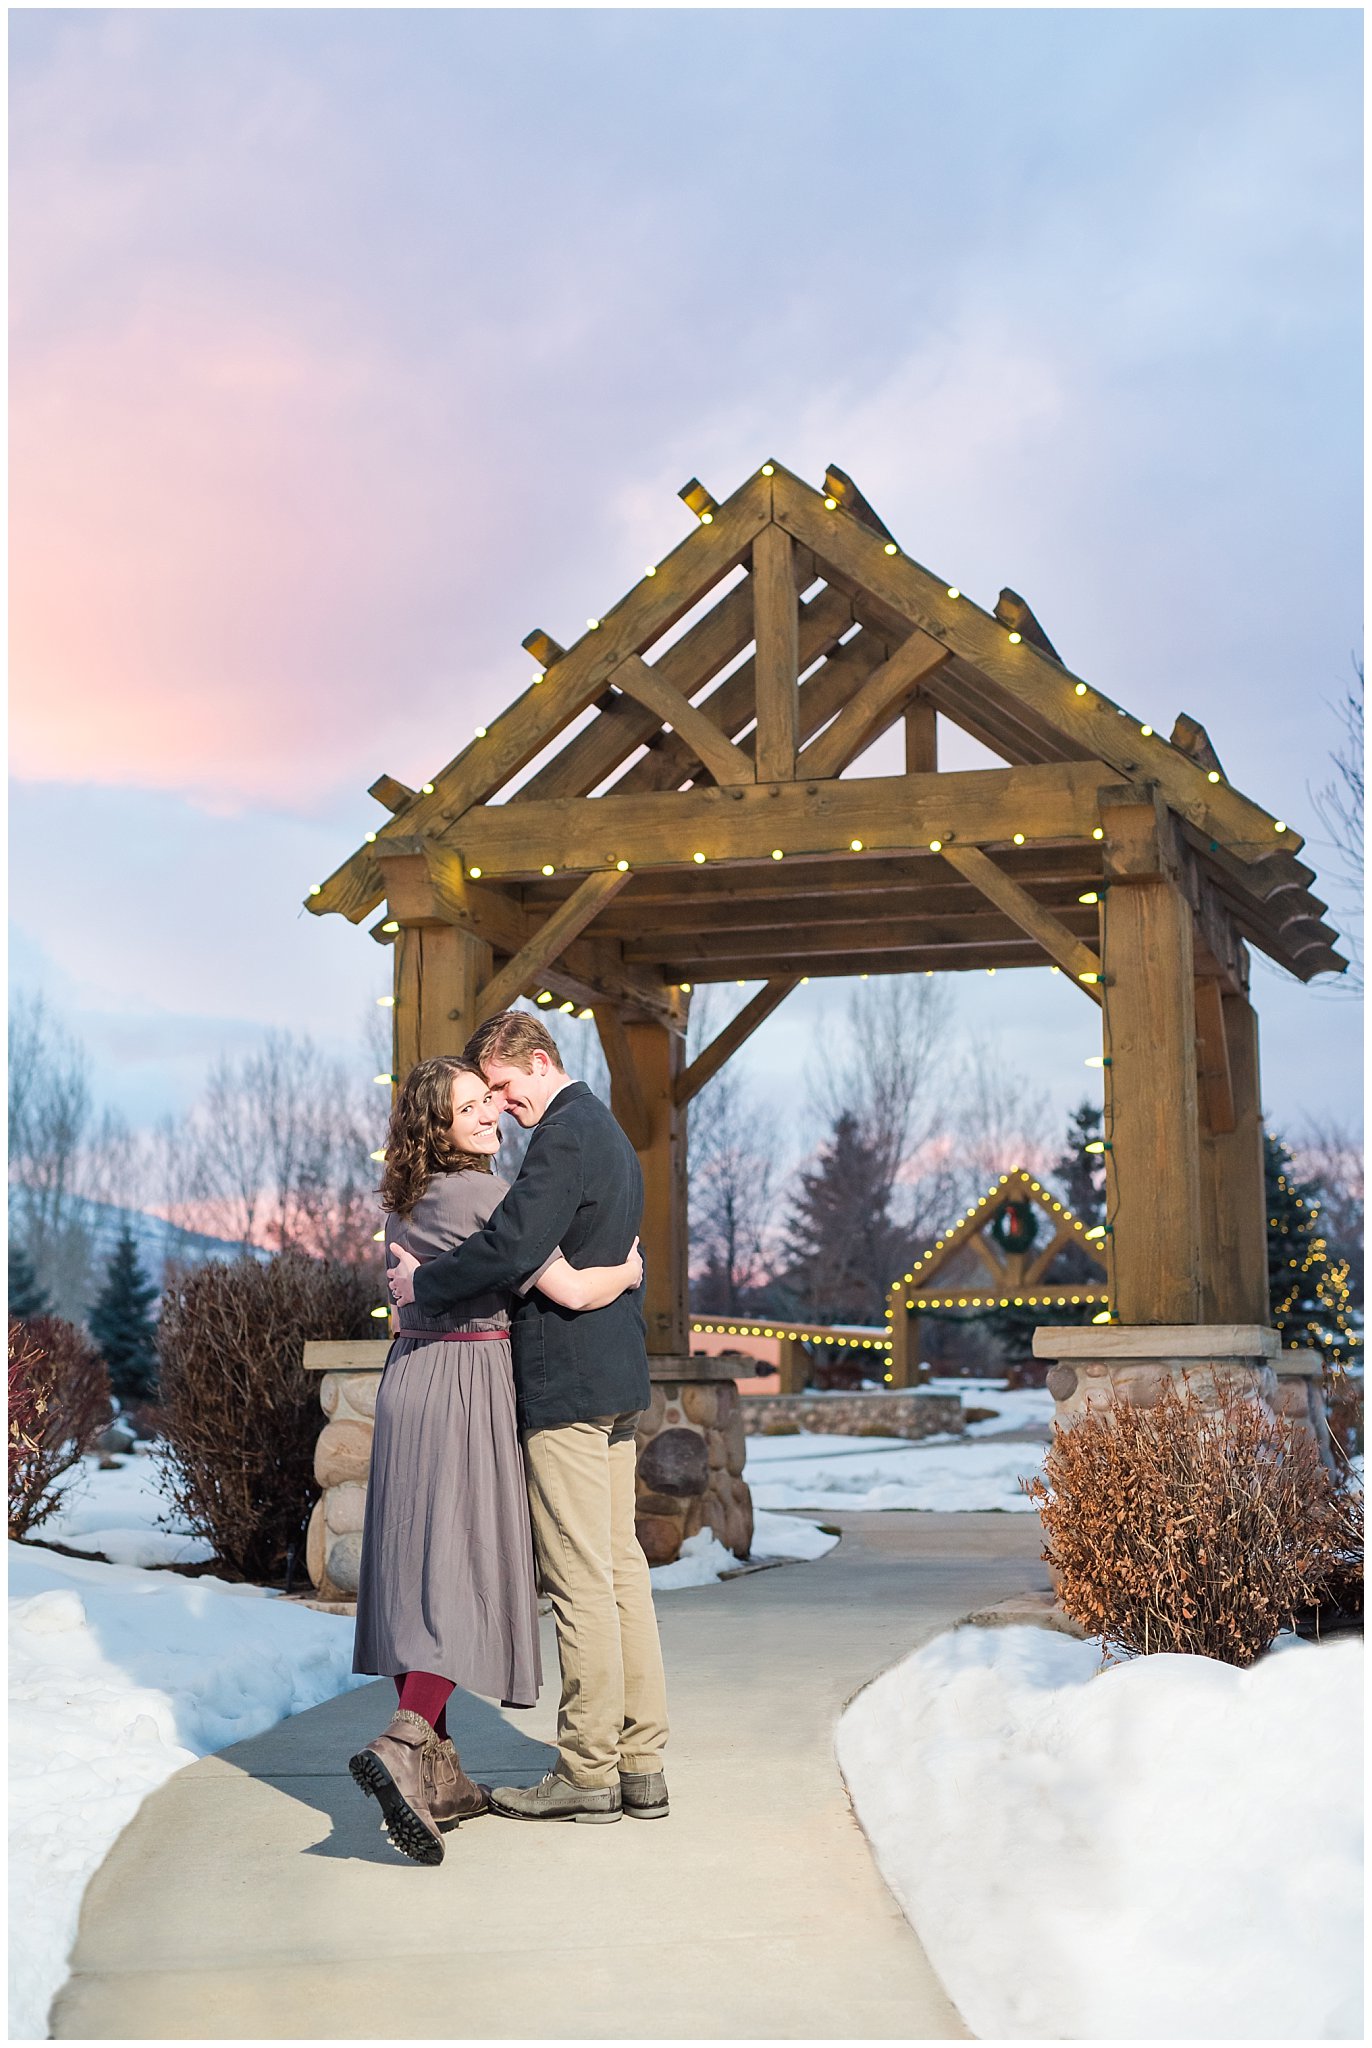 Snowy sunset engagement session with couple dressed up in grey dress and navy sport coat in the mountains | Snowbasin Winter Engagement Session